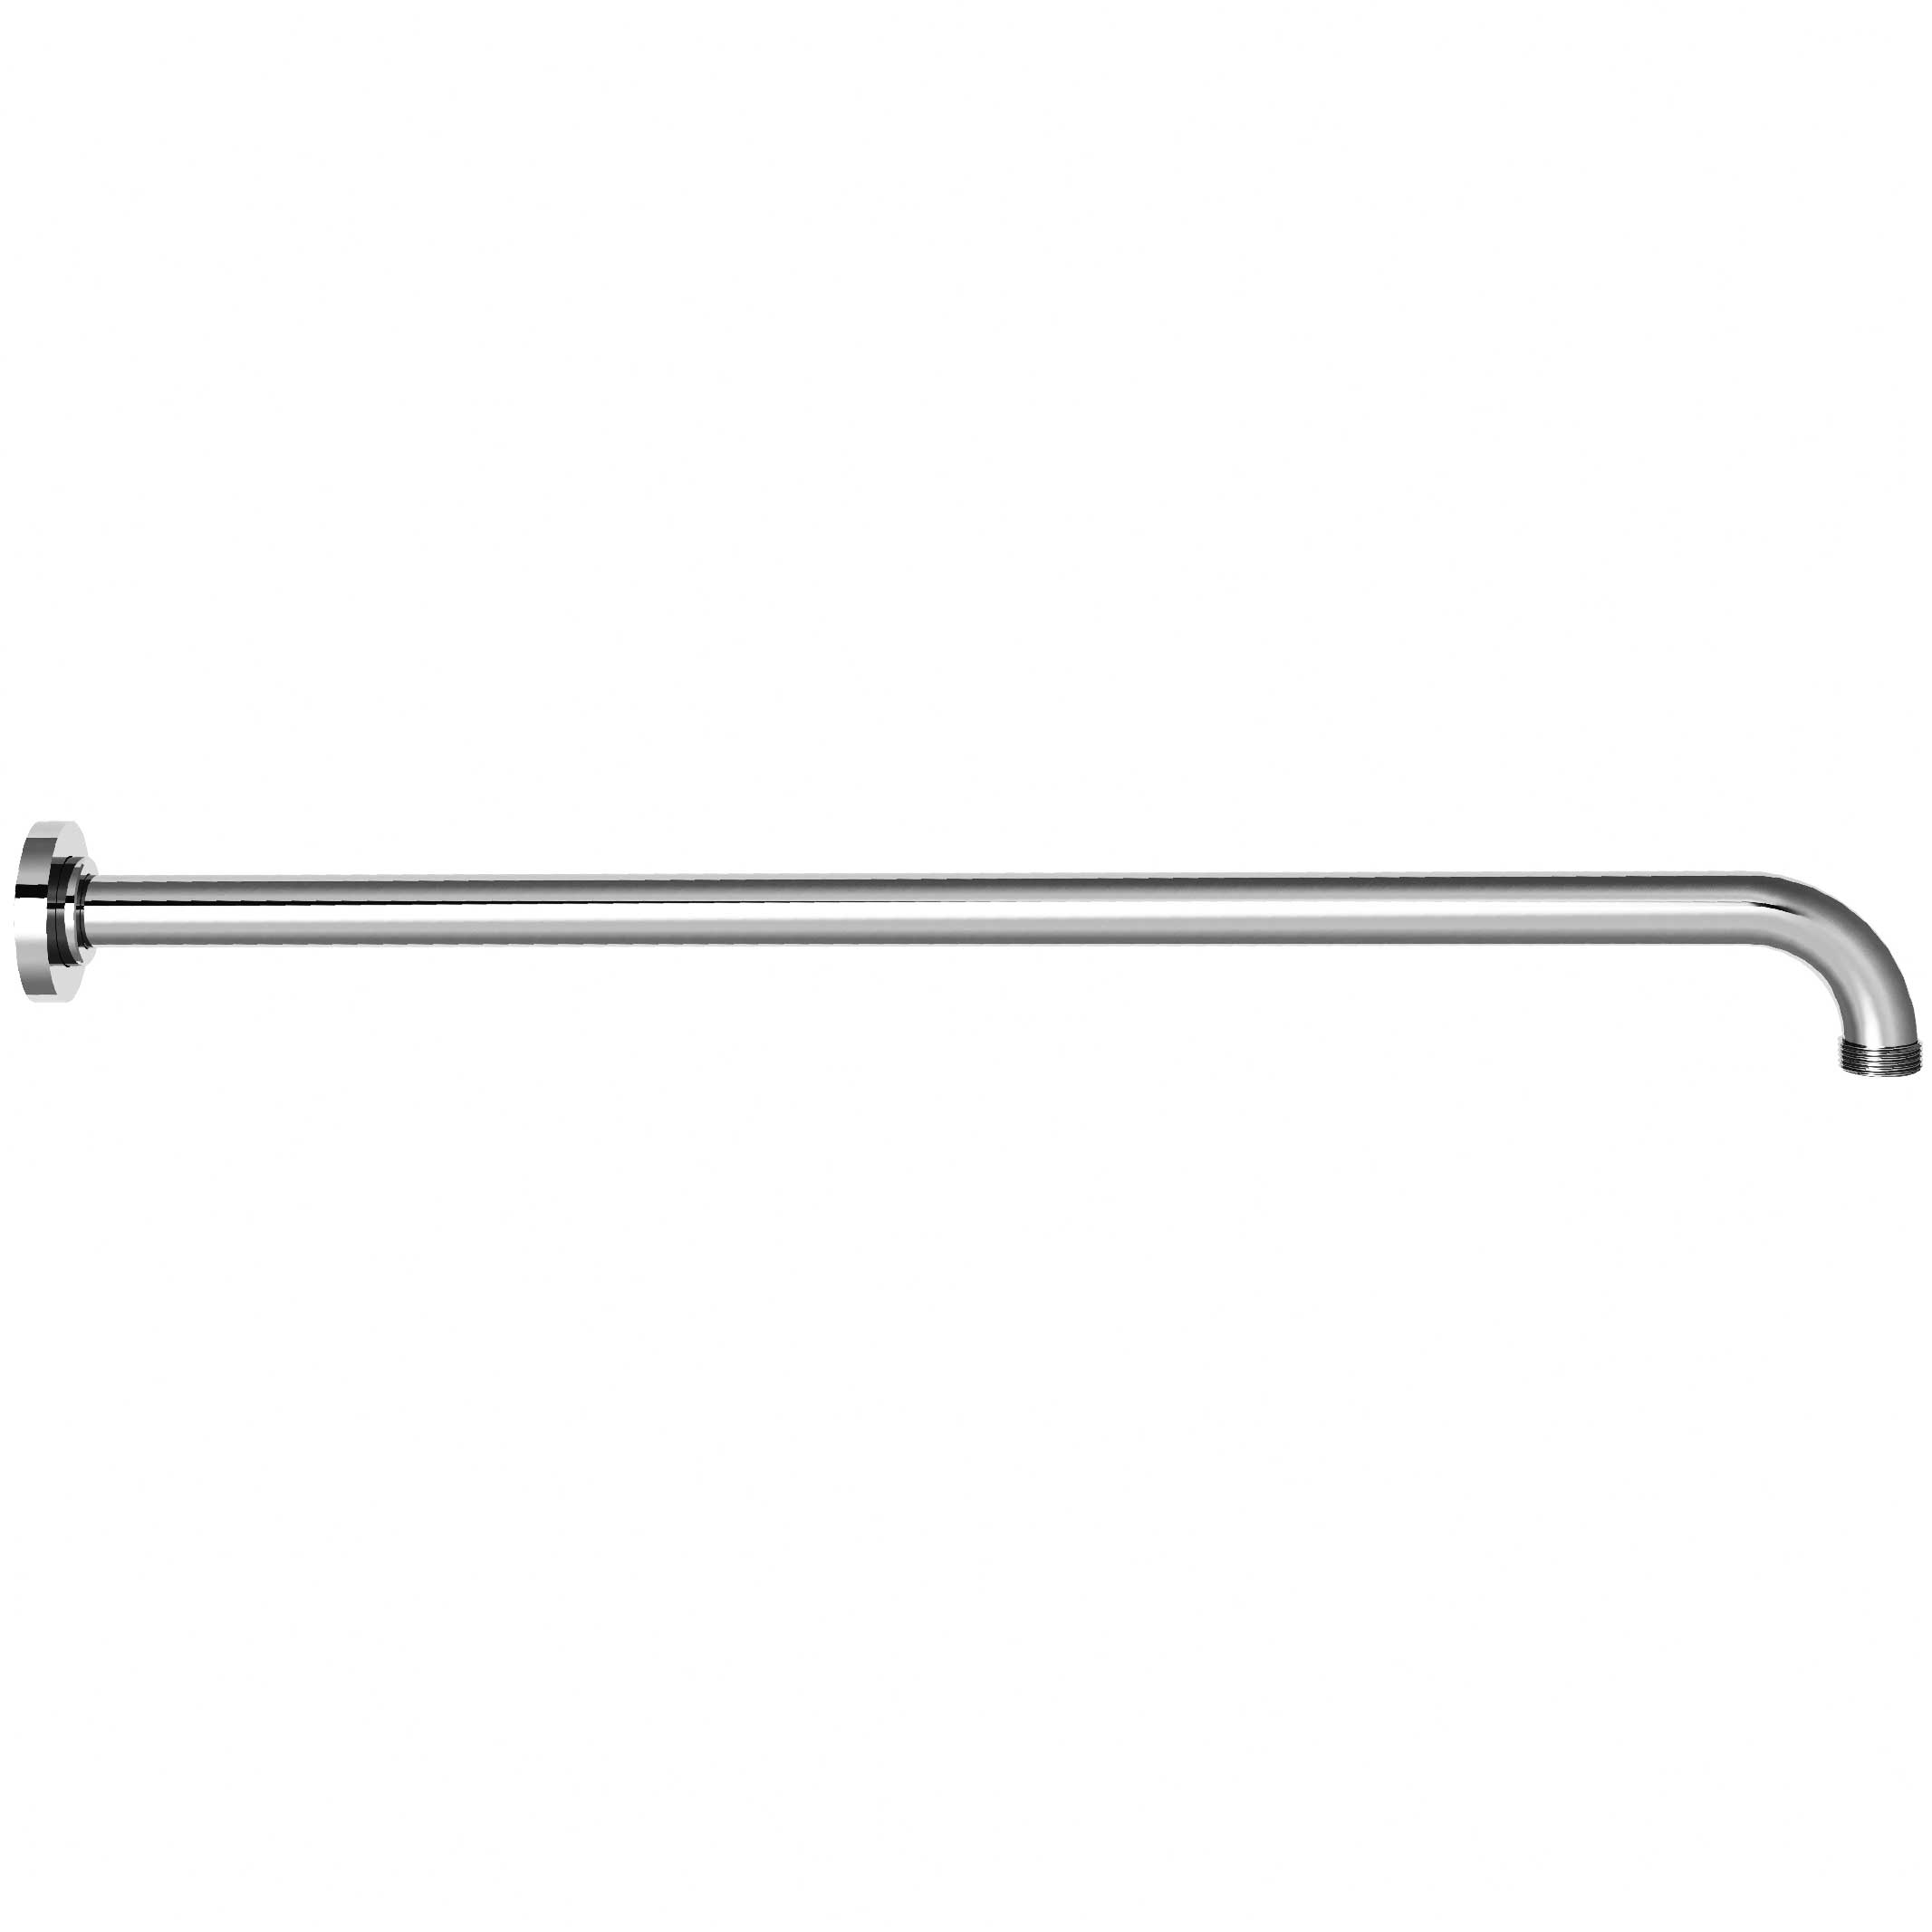 M91-2W450 Wall mounted shower arm 450mm